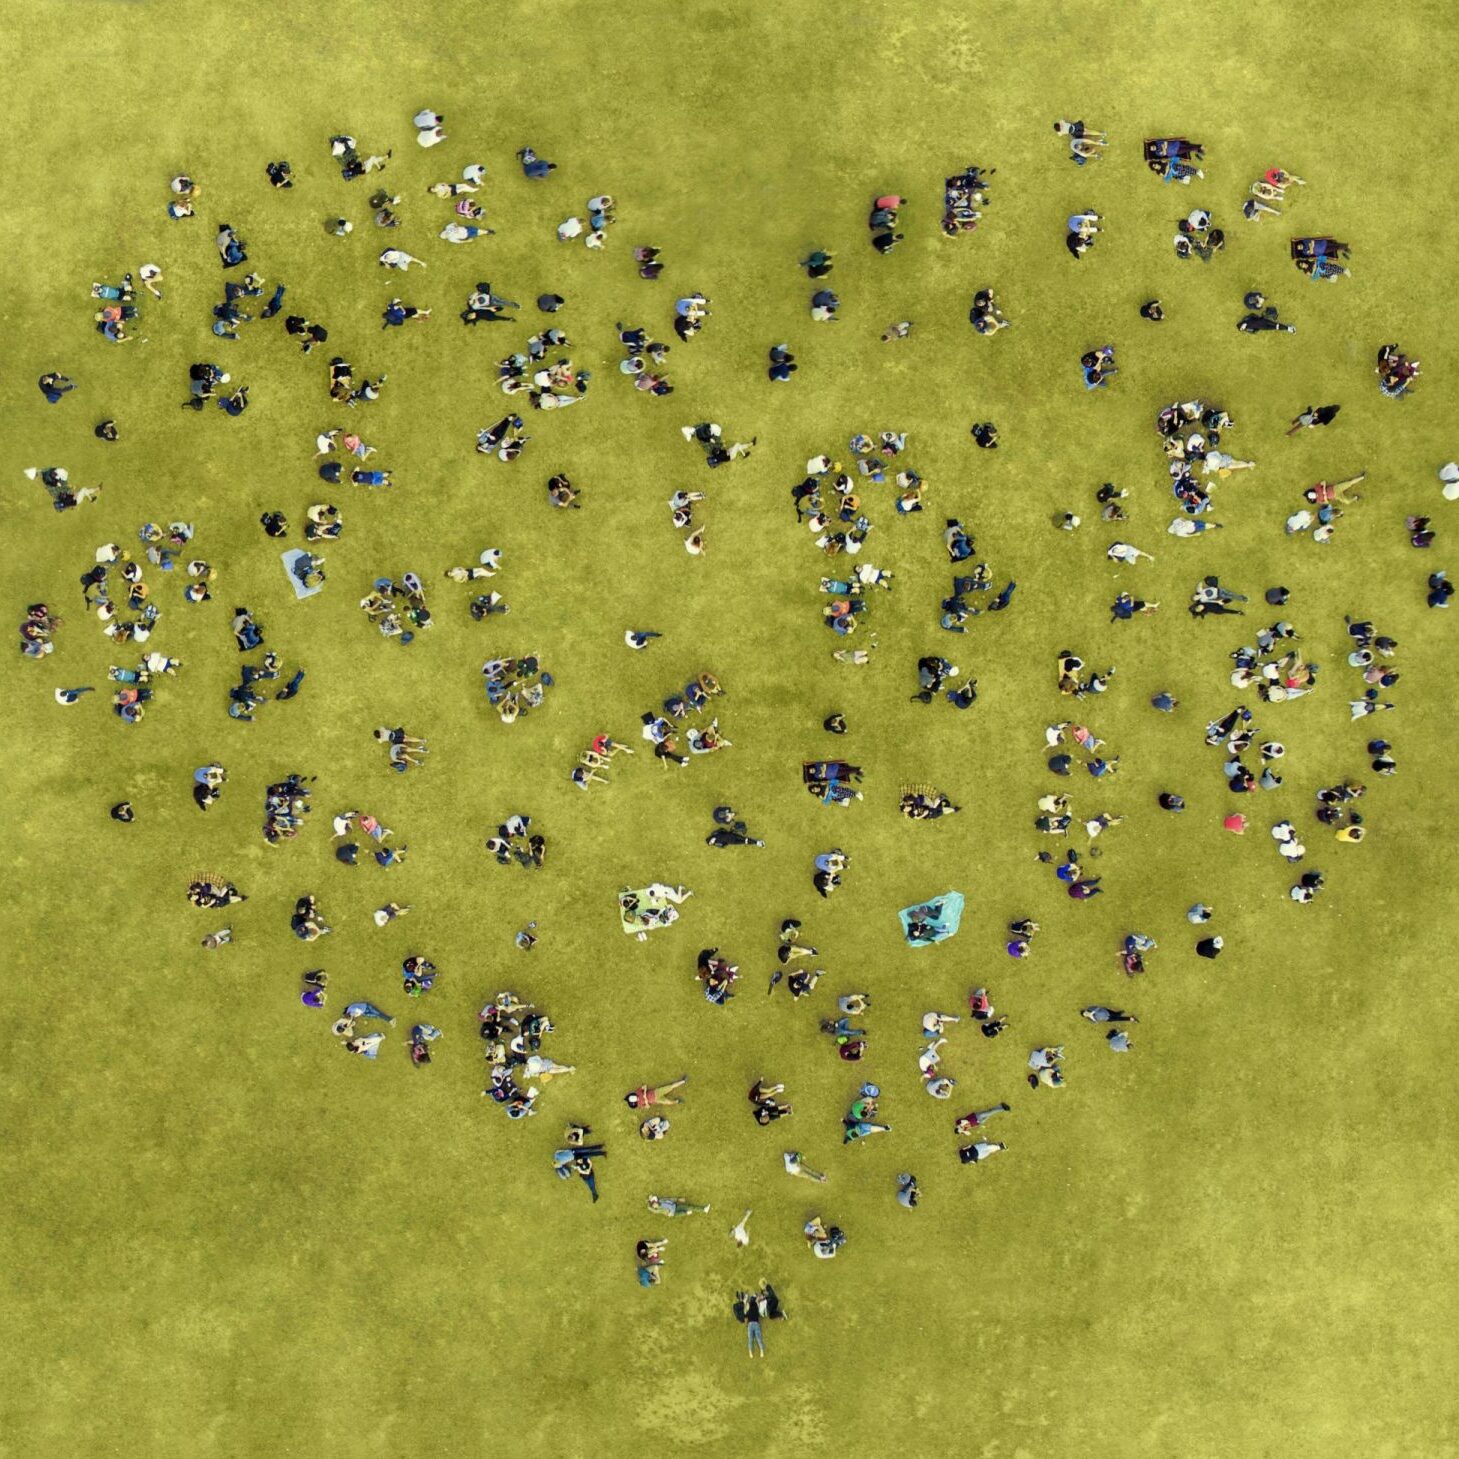 People sunbathing in the Park while forming a heart